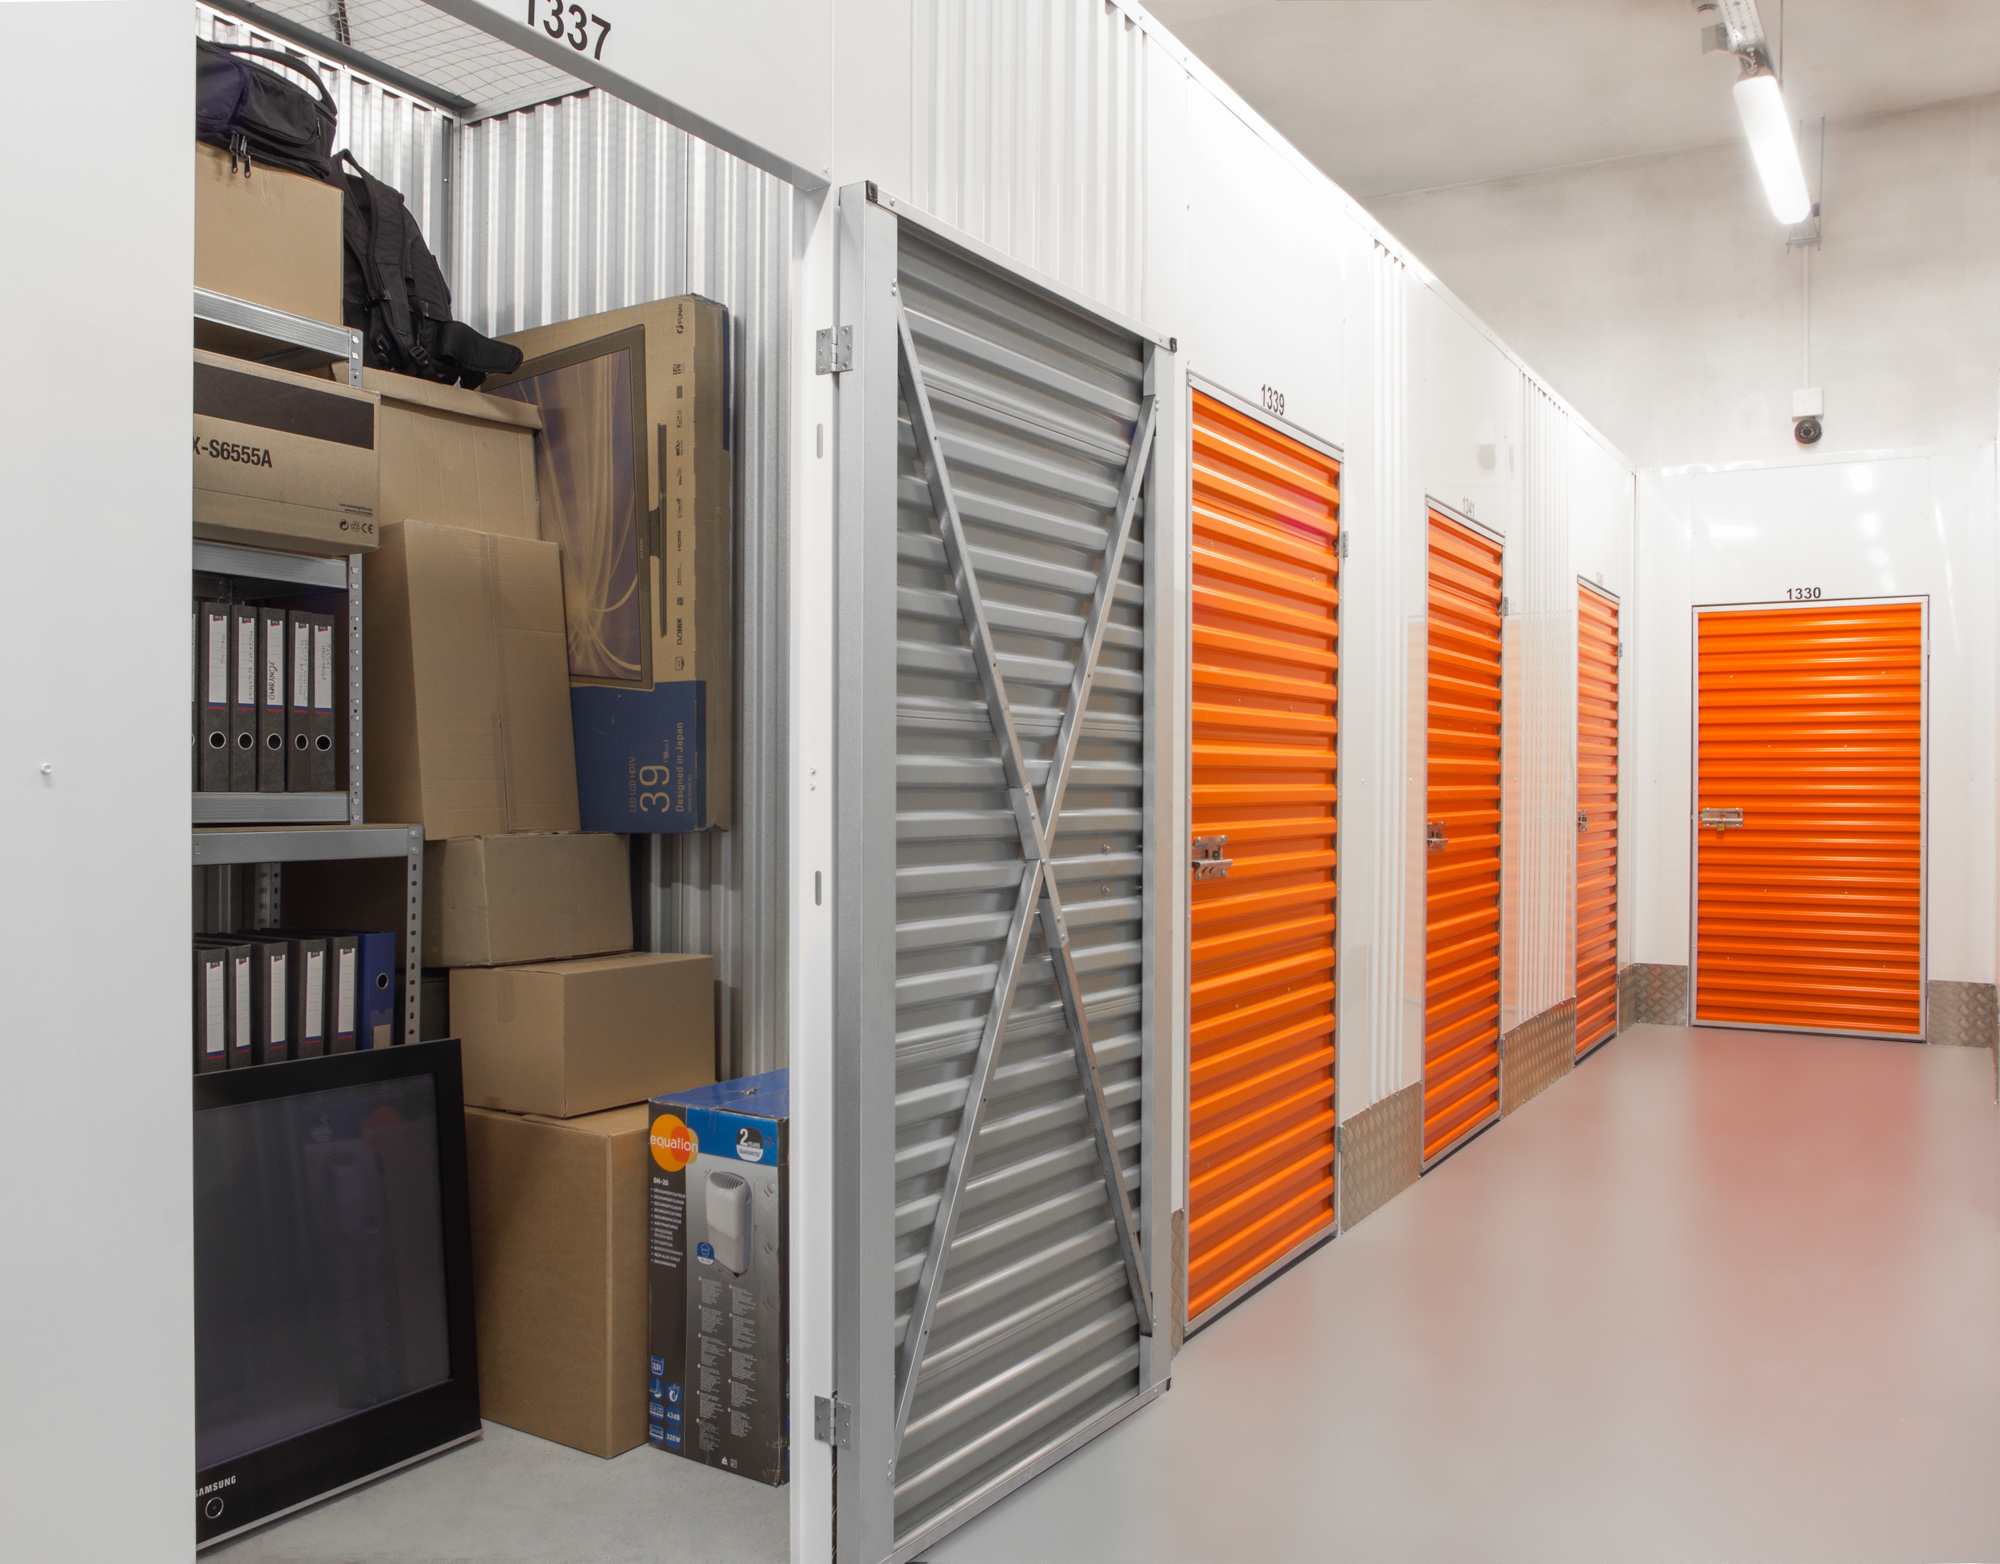 4 Reasons You Need to Store Your Stuff in a Self Storage Facility